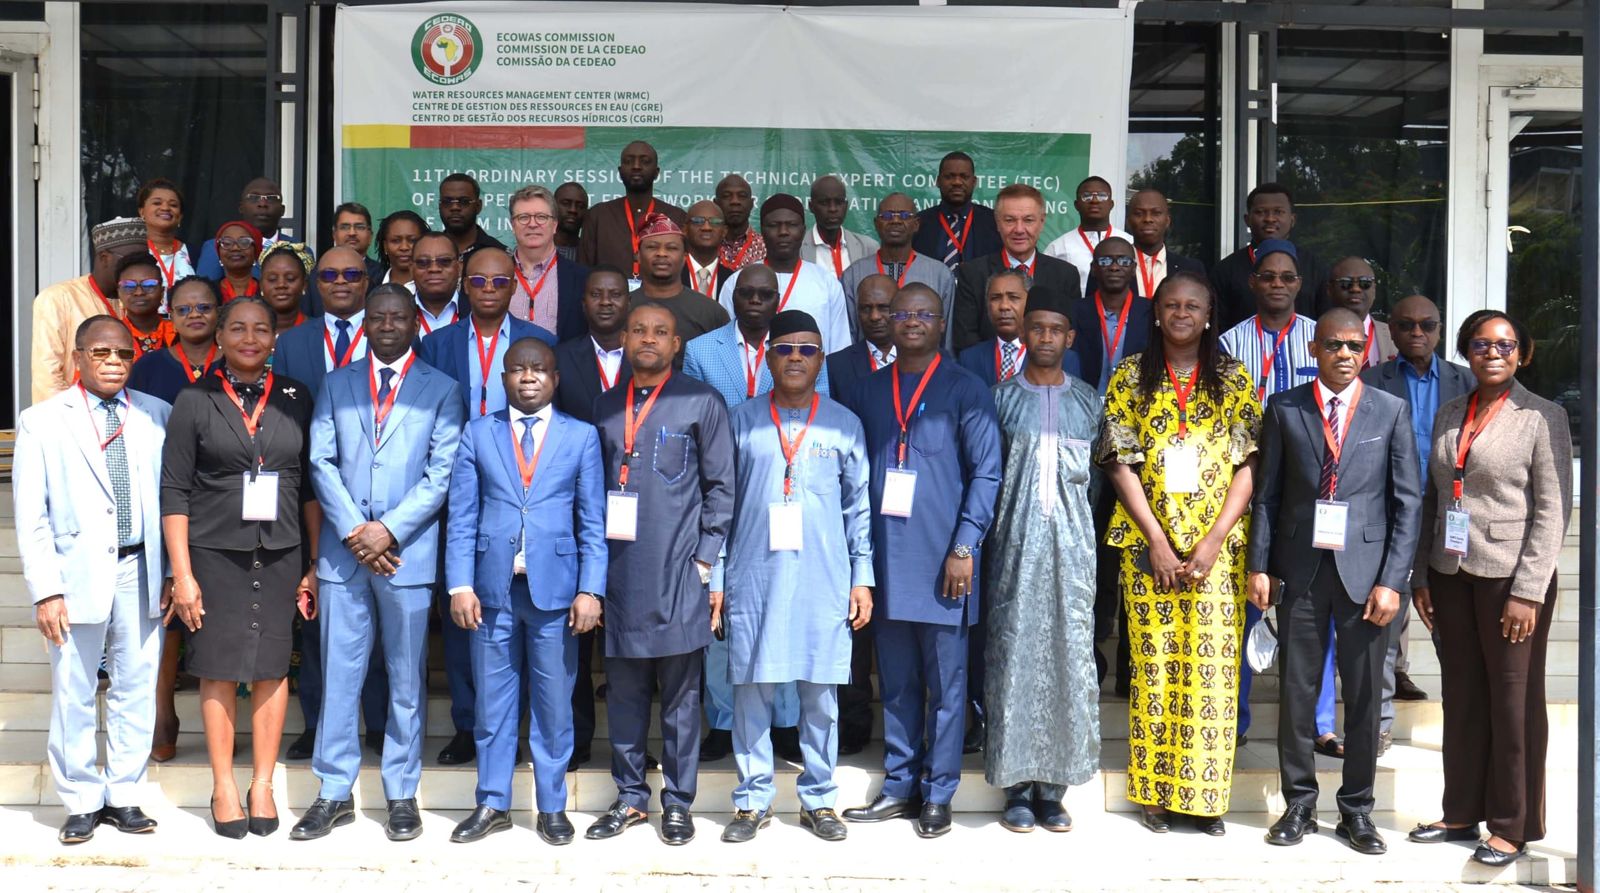 Nigeria to receive over 50% of global water fund - ECOWAS - Daily TrustThe Economic Community of West African States (ECOWAS), has said Nigeria ...